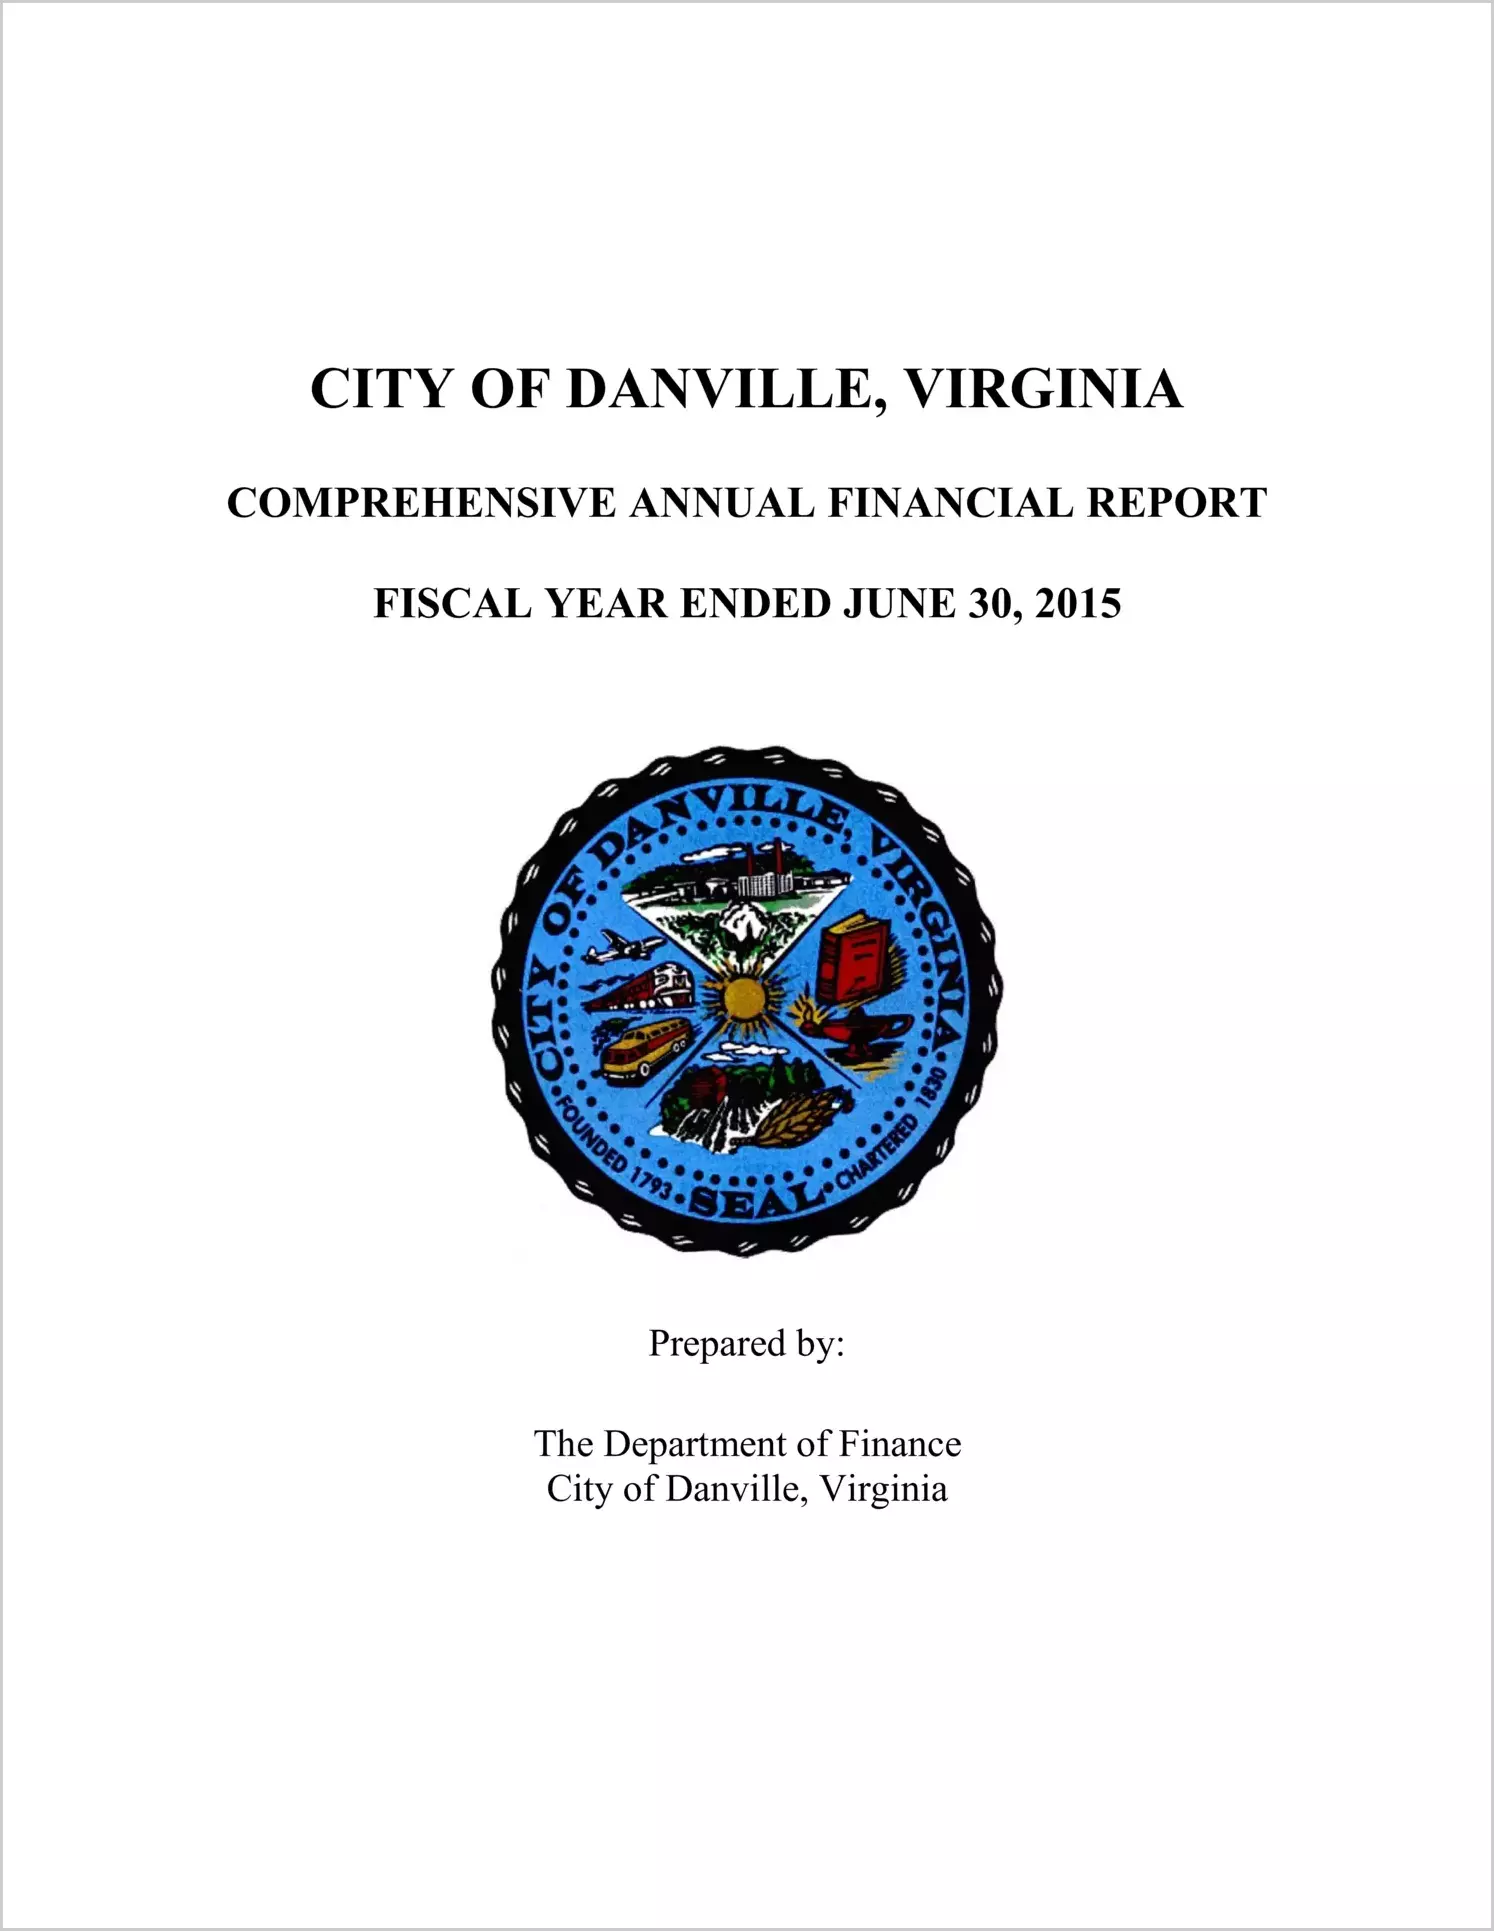 2015 Annual Financial Report for City of Danville